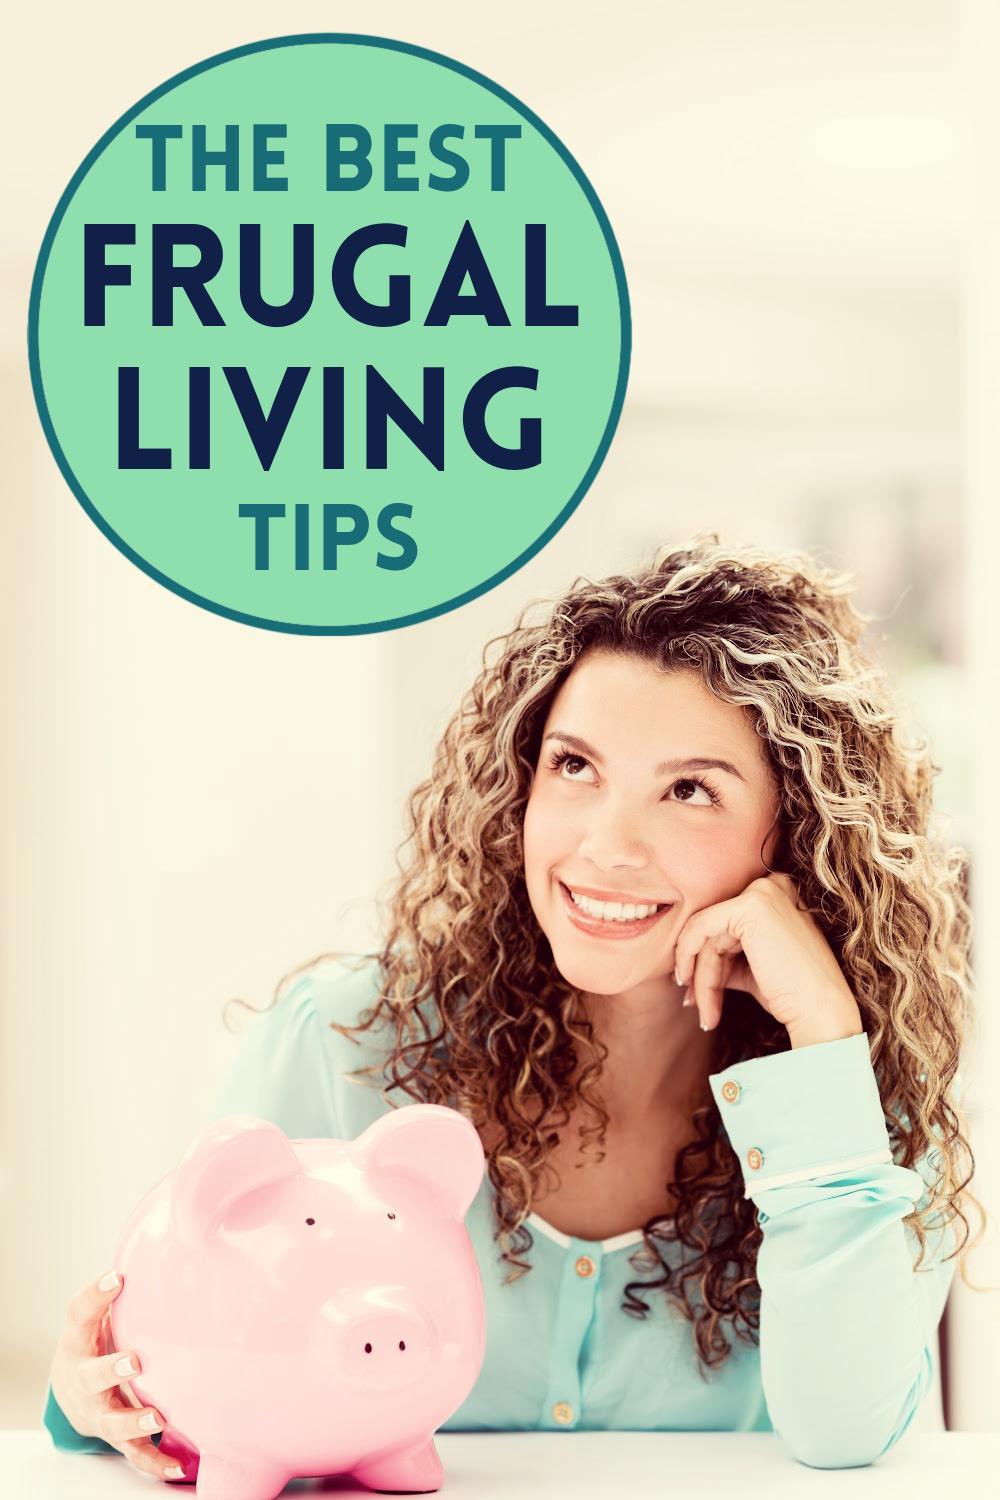 The Best Frugal Living Tips for Beginners by PositivelyFrugal.com